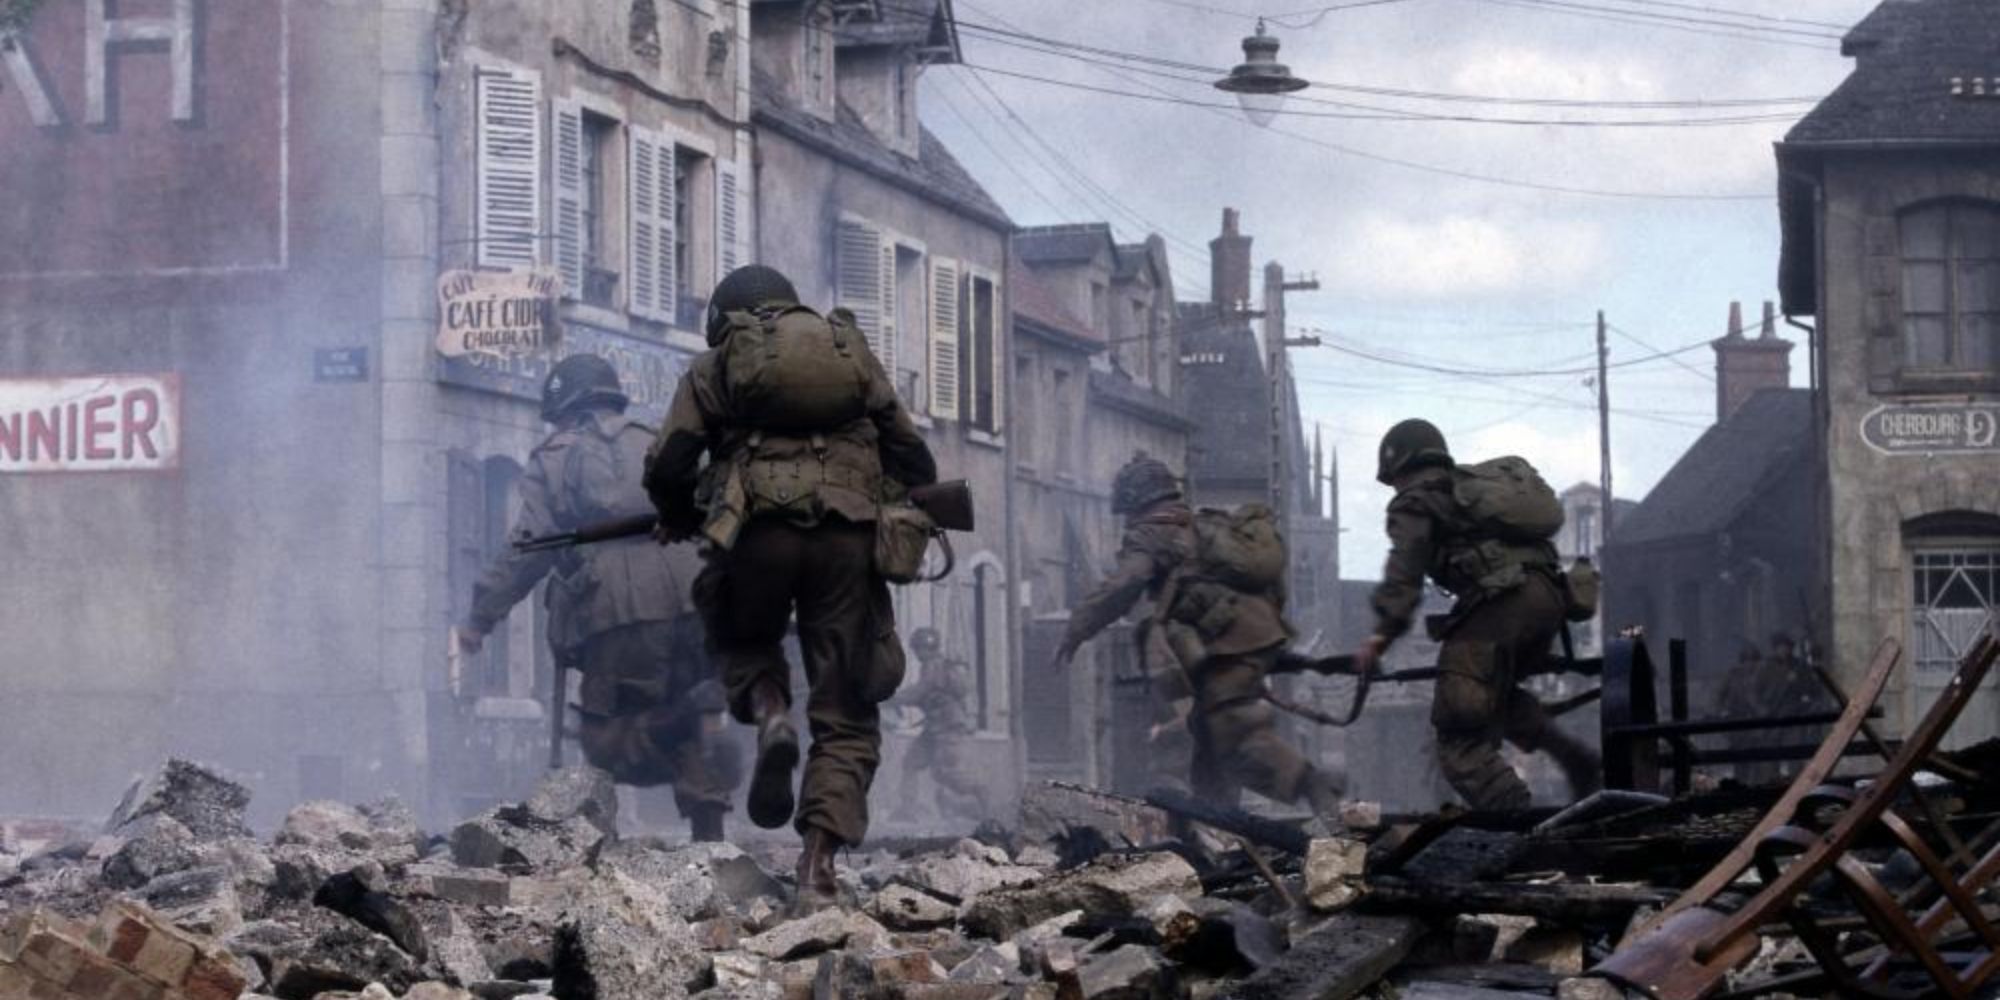 A group of soldiers running through a demolished city in Band of Brothers